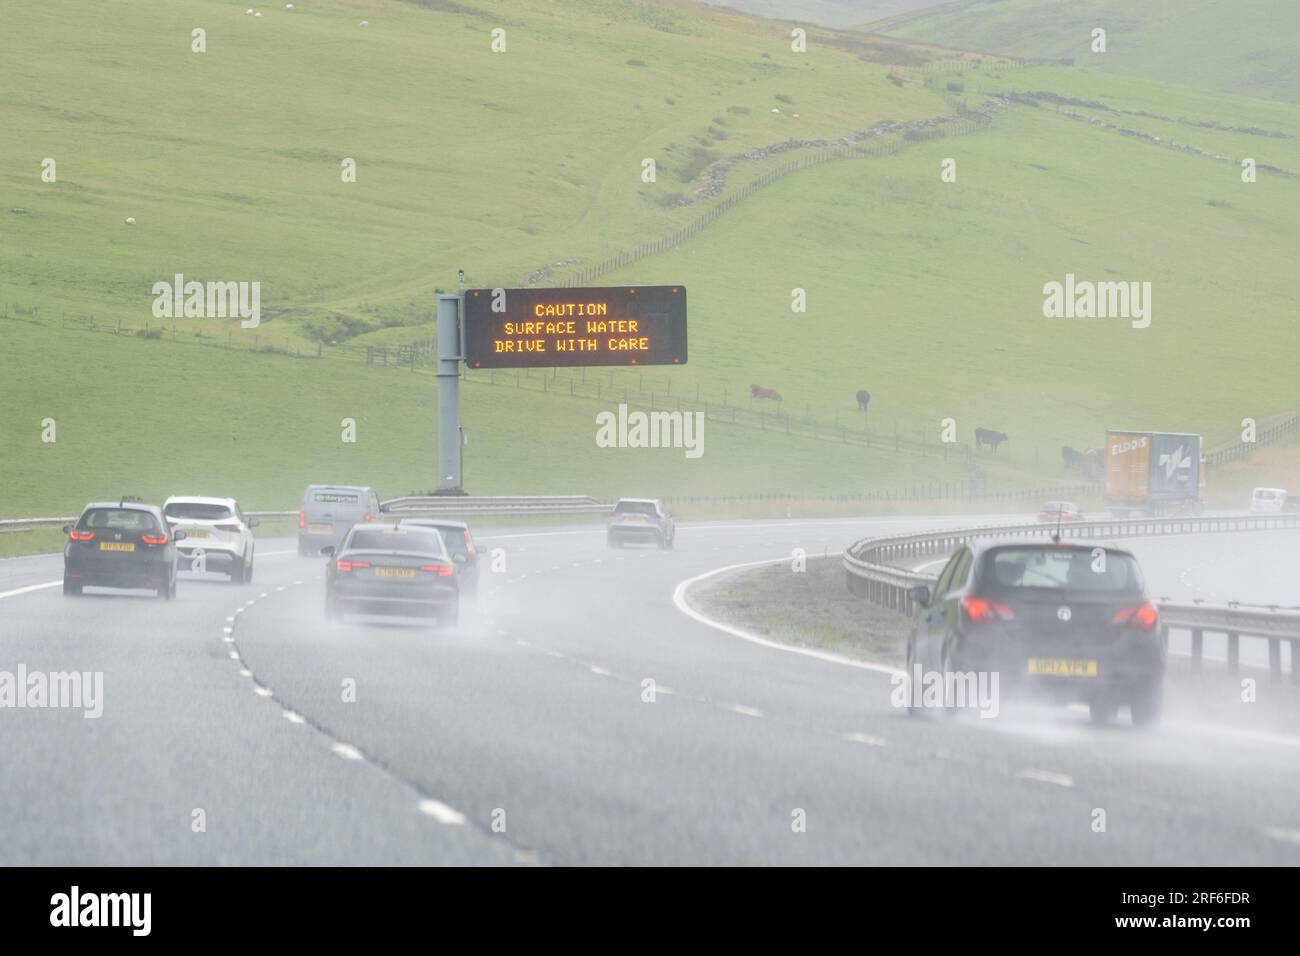 Surface water on uk motorway - caution surface water drive with care sign - Scotland, UK Stock Photo